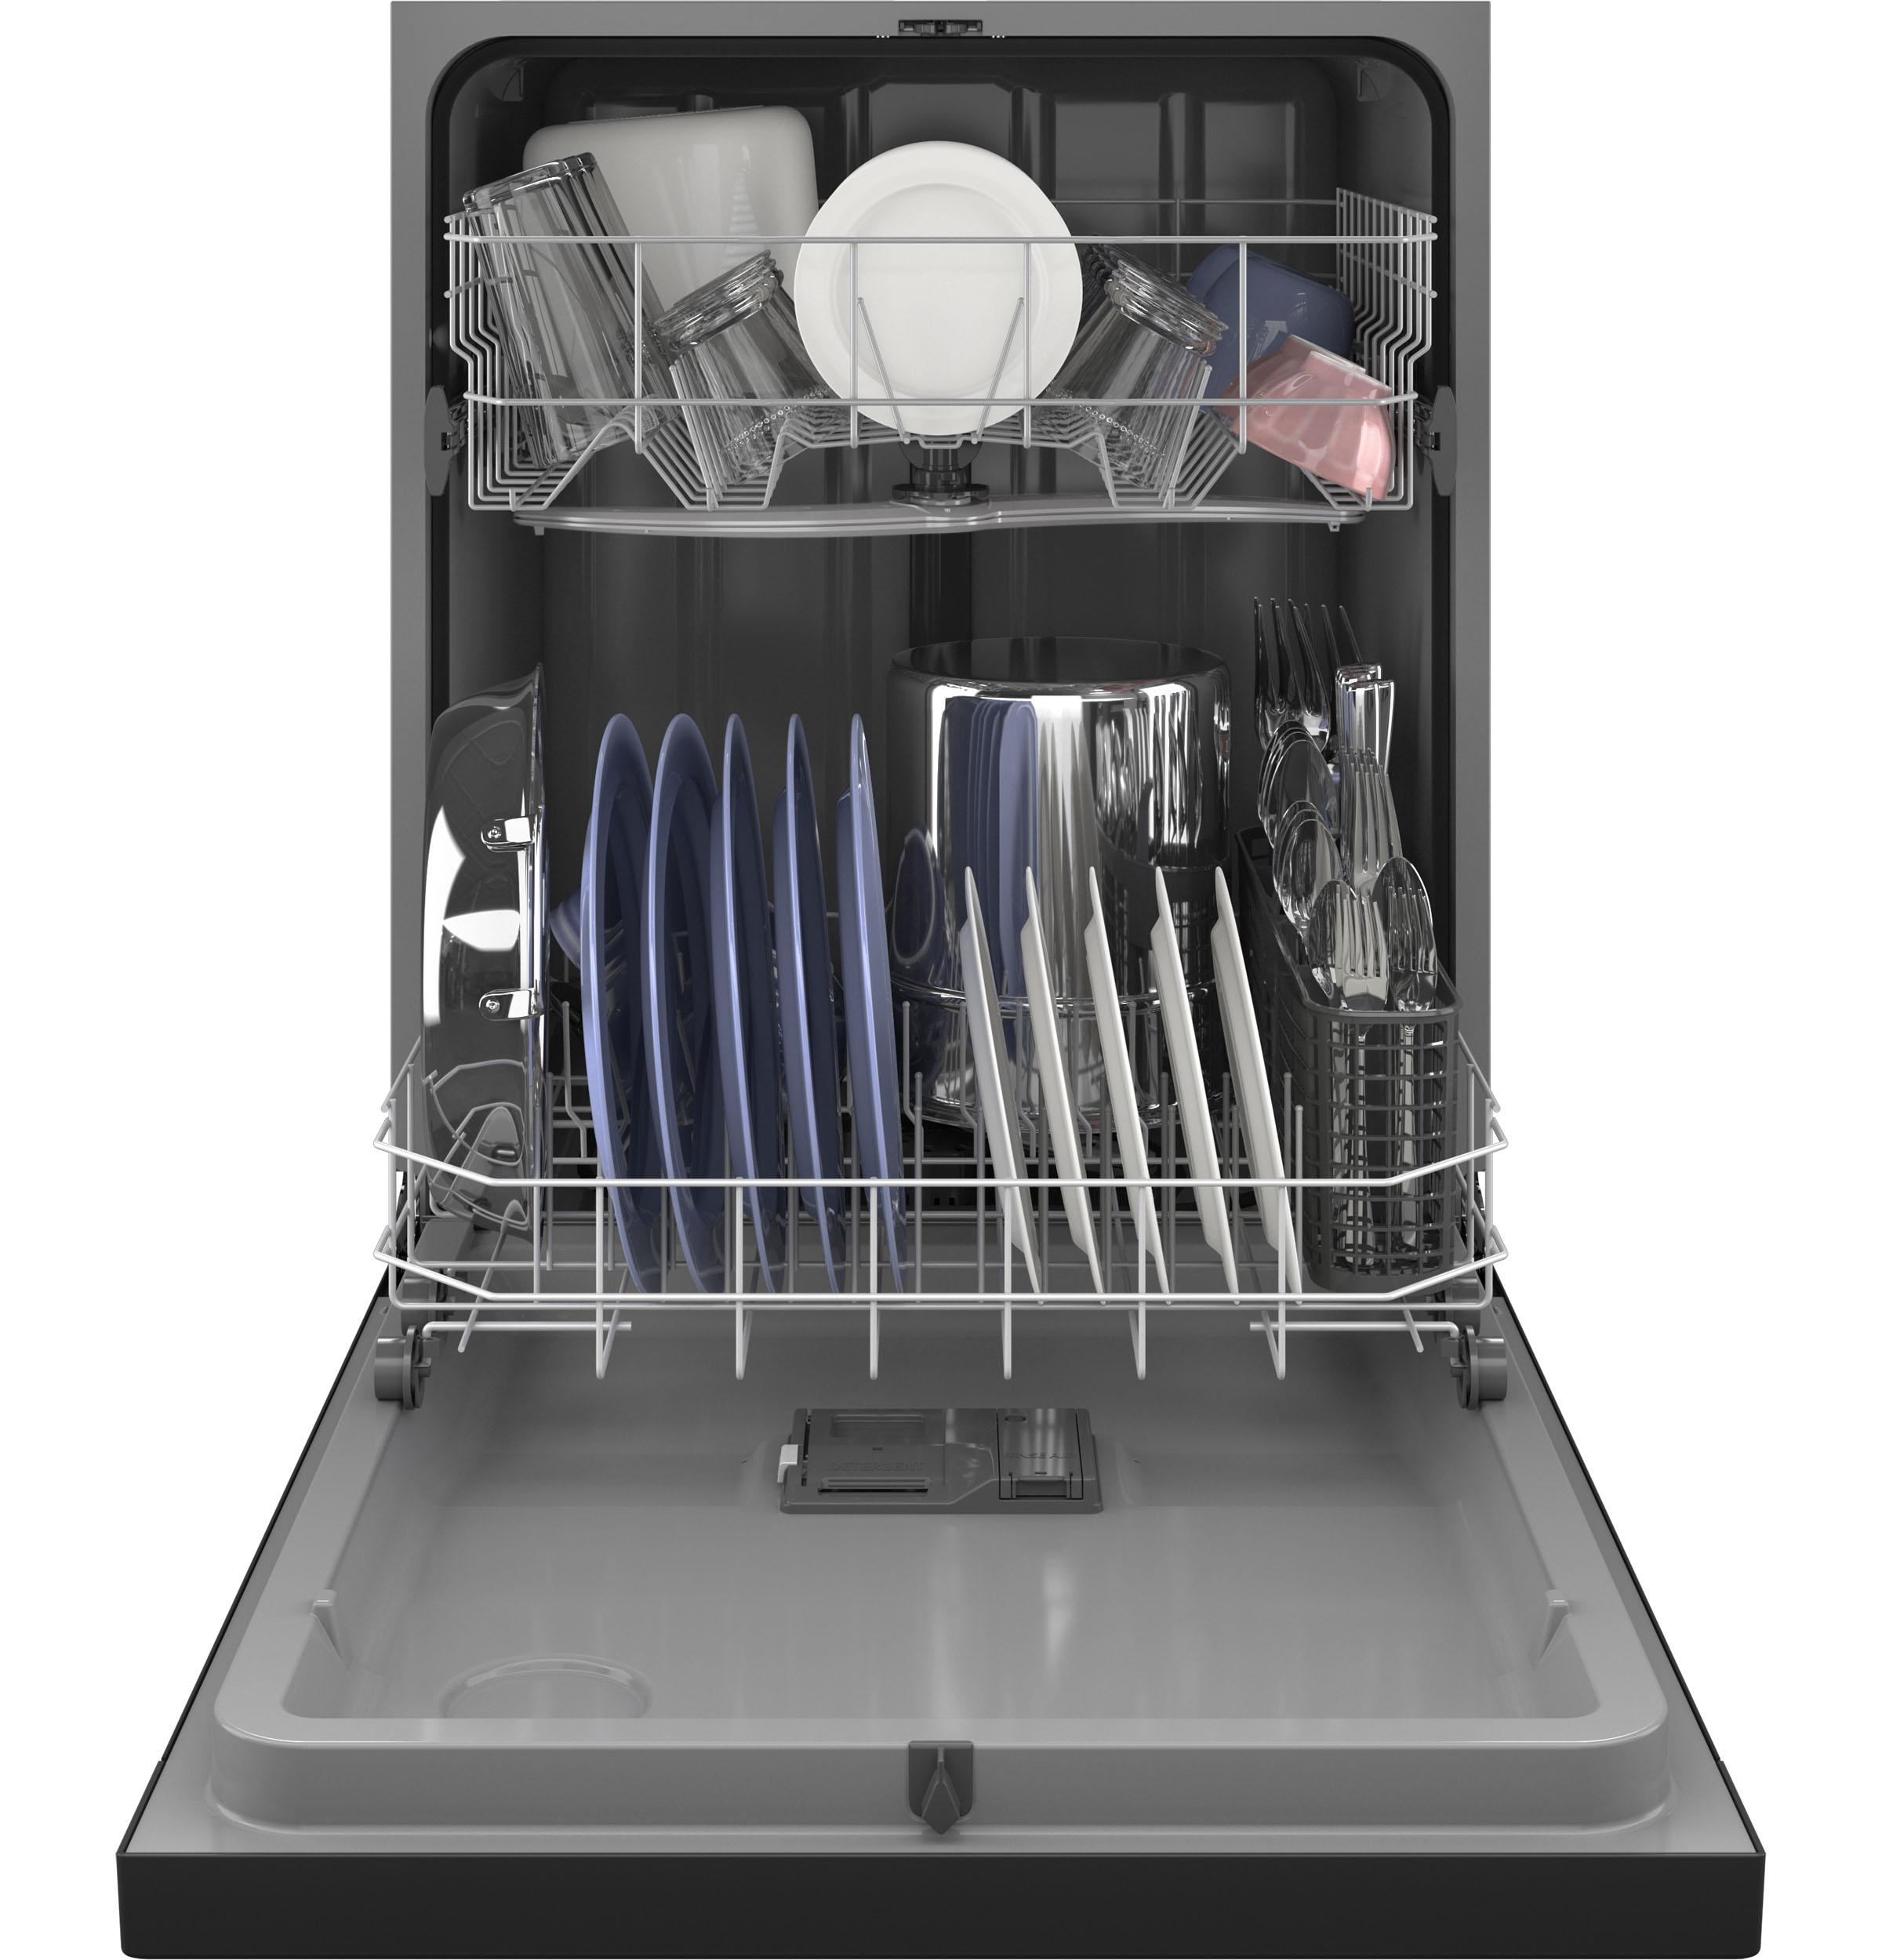 Hotpoint® One Button Dishwasher with Plastic Interior